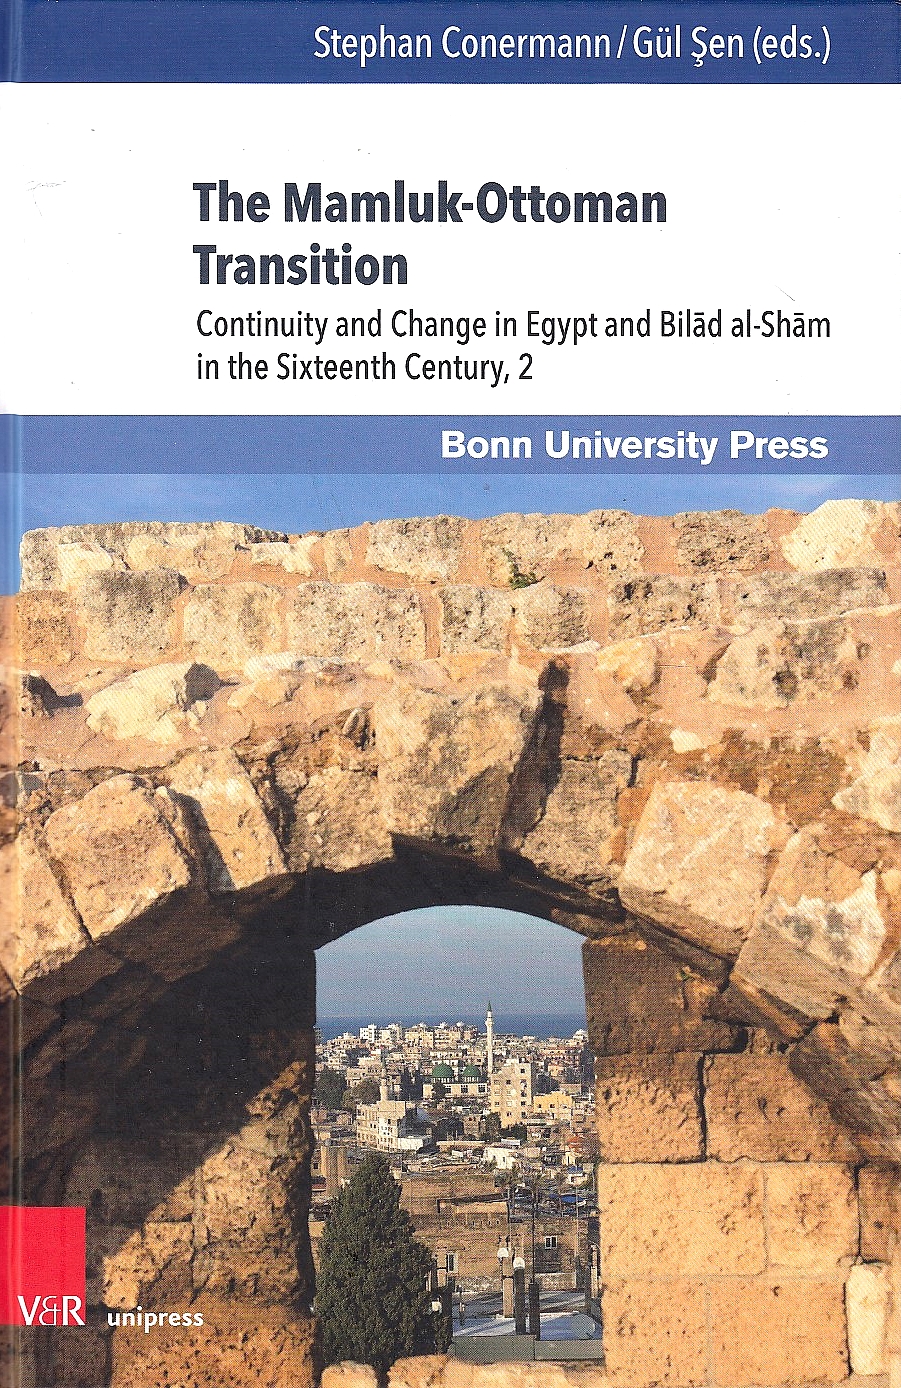 The Mamluk-Ottoman Transition: continuity and change in Egypt and Bilād al-Shām in the sixteenth century, 2.